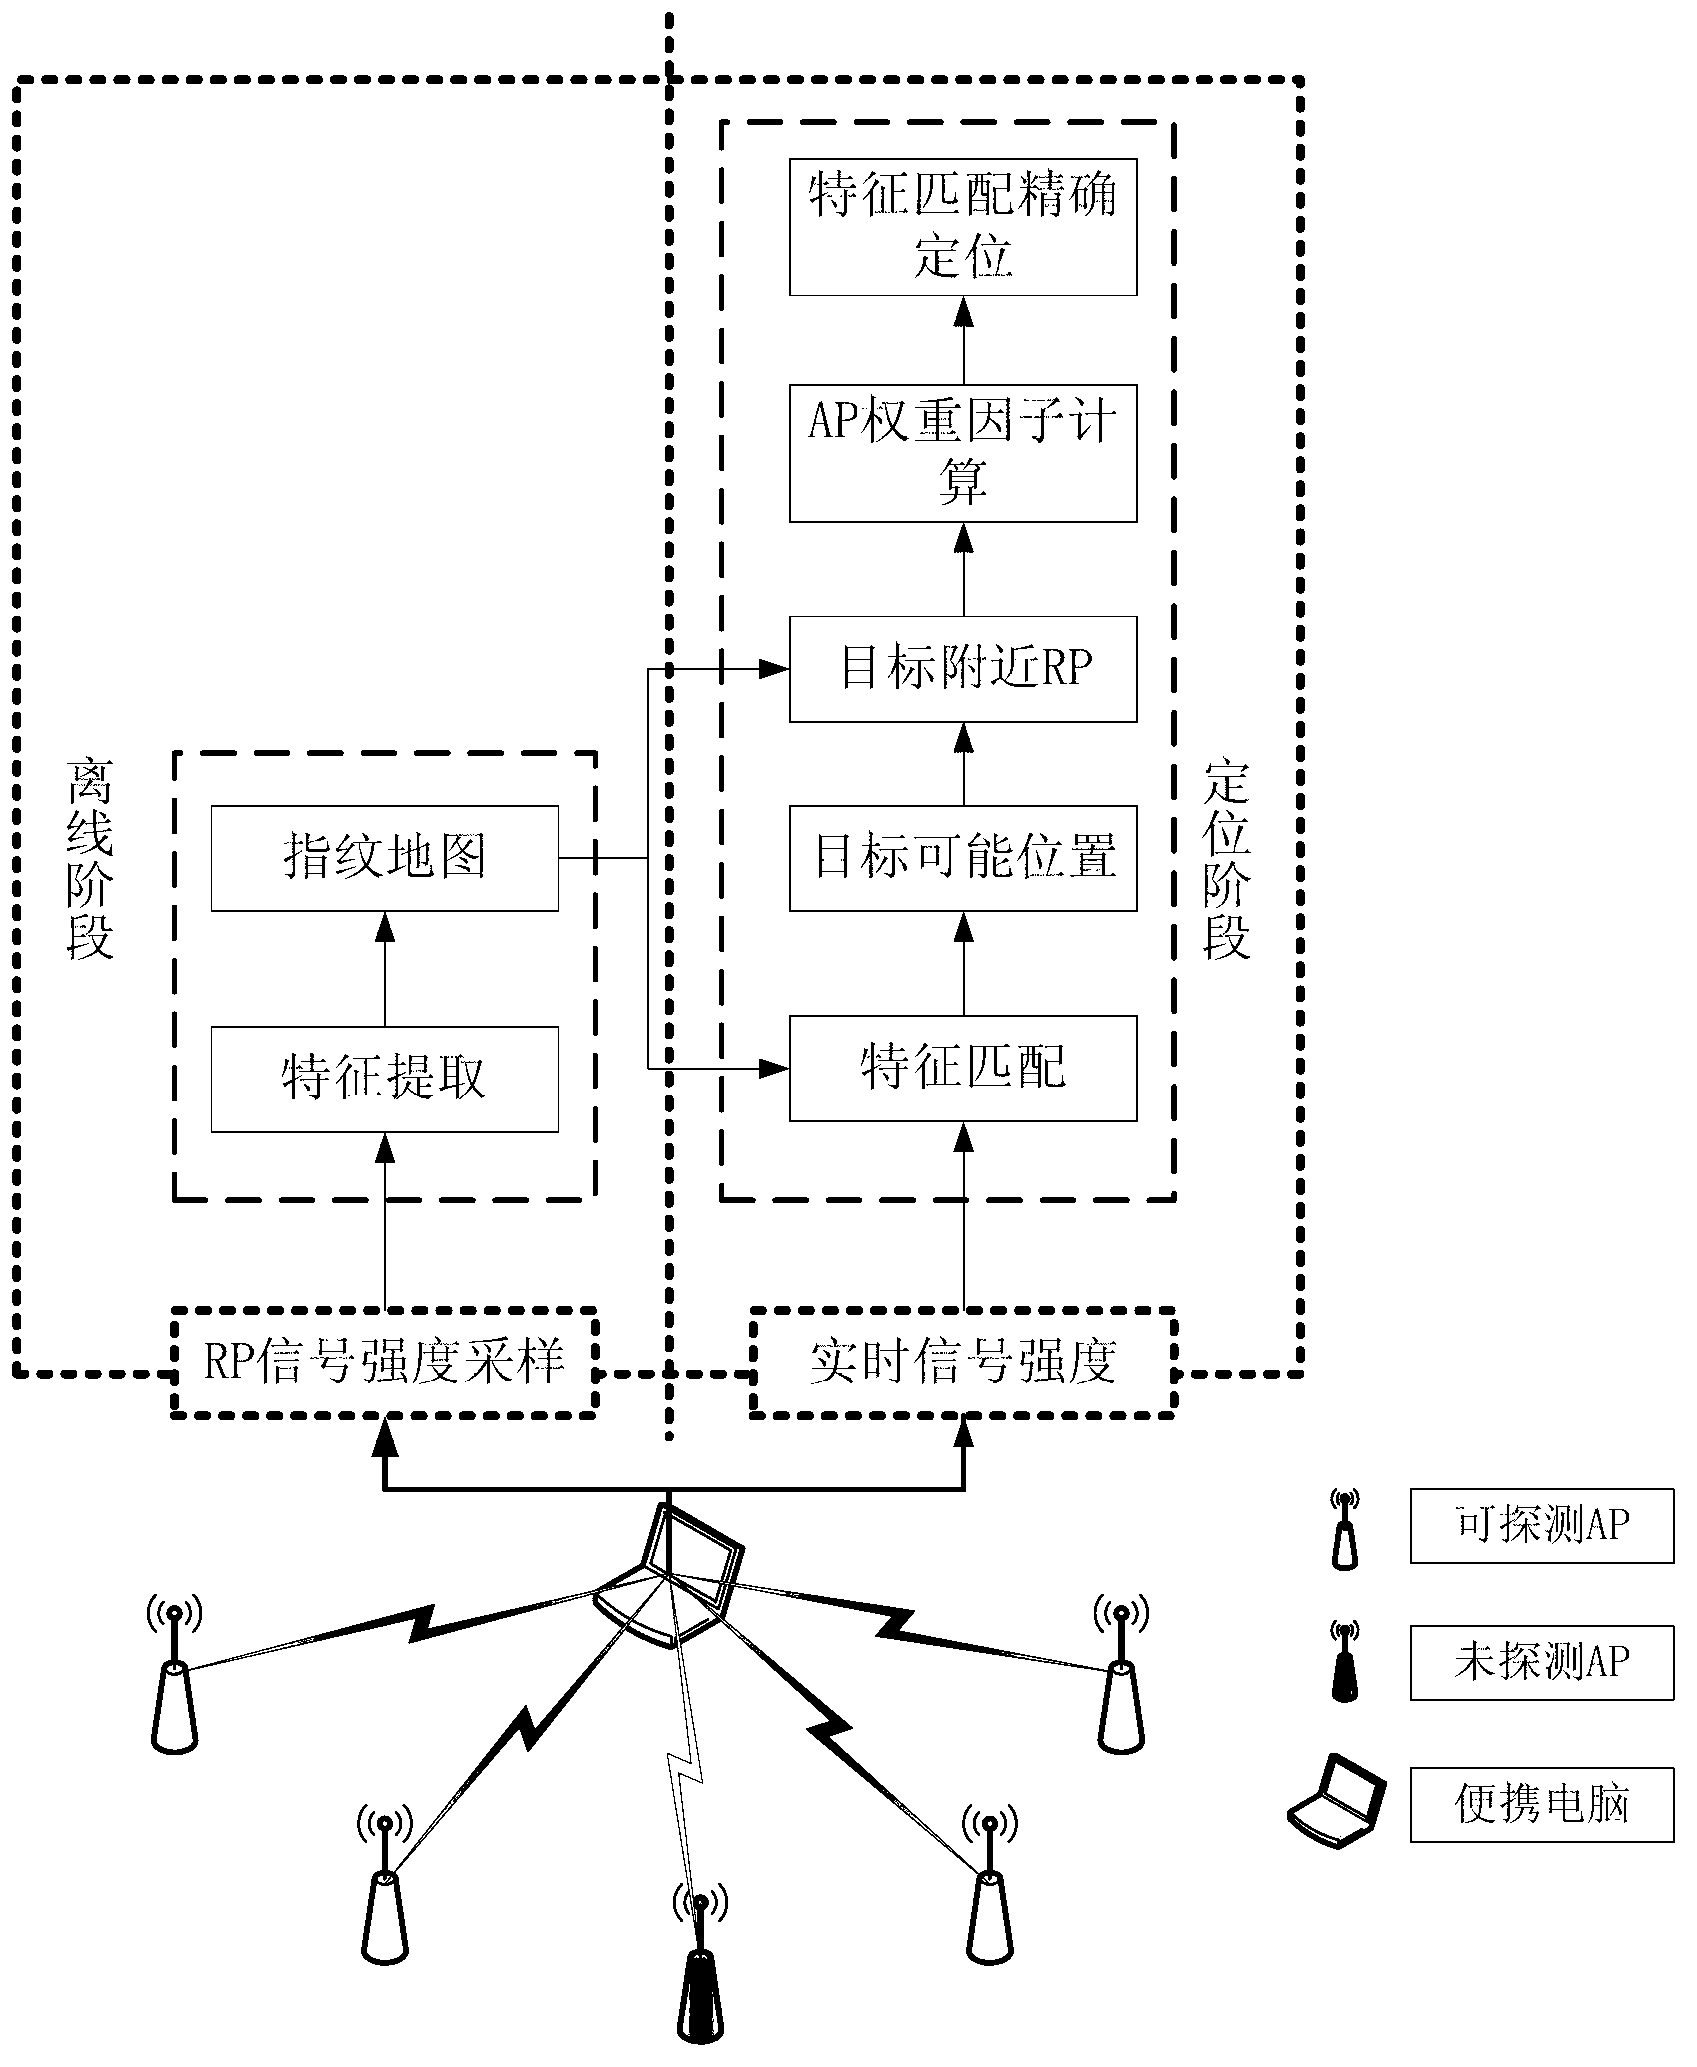 Position fingerprint locating method performing self-adaption adjusting based on access point (AP) weight